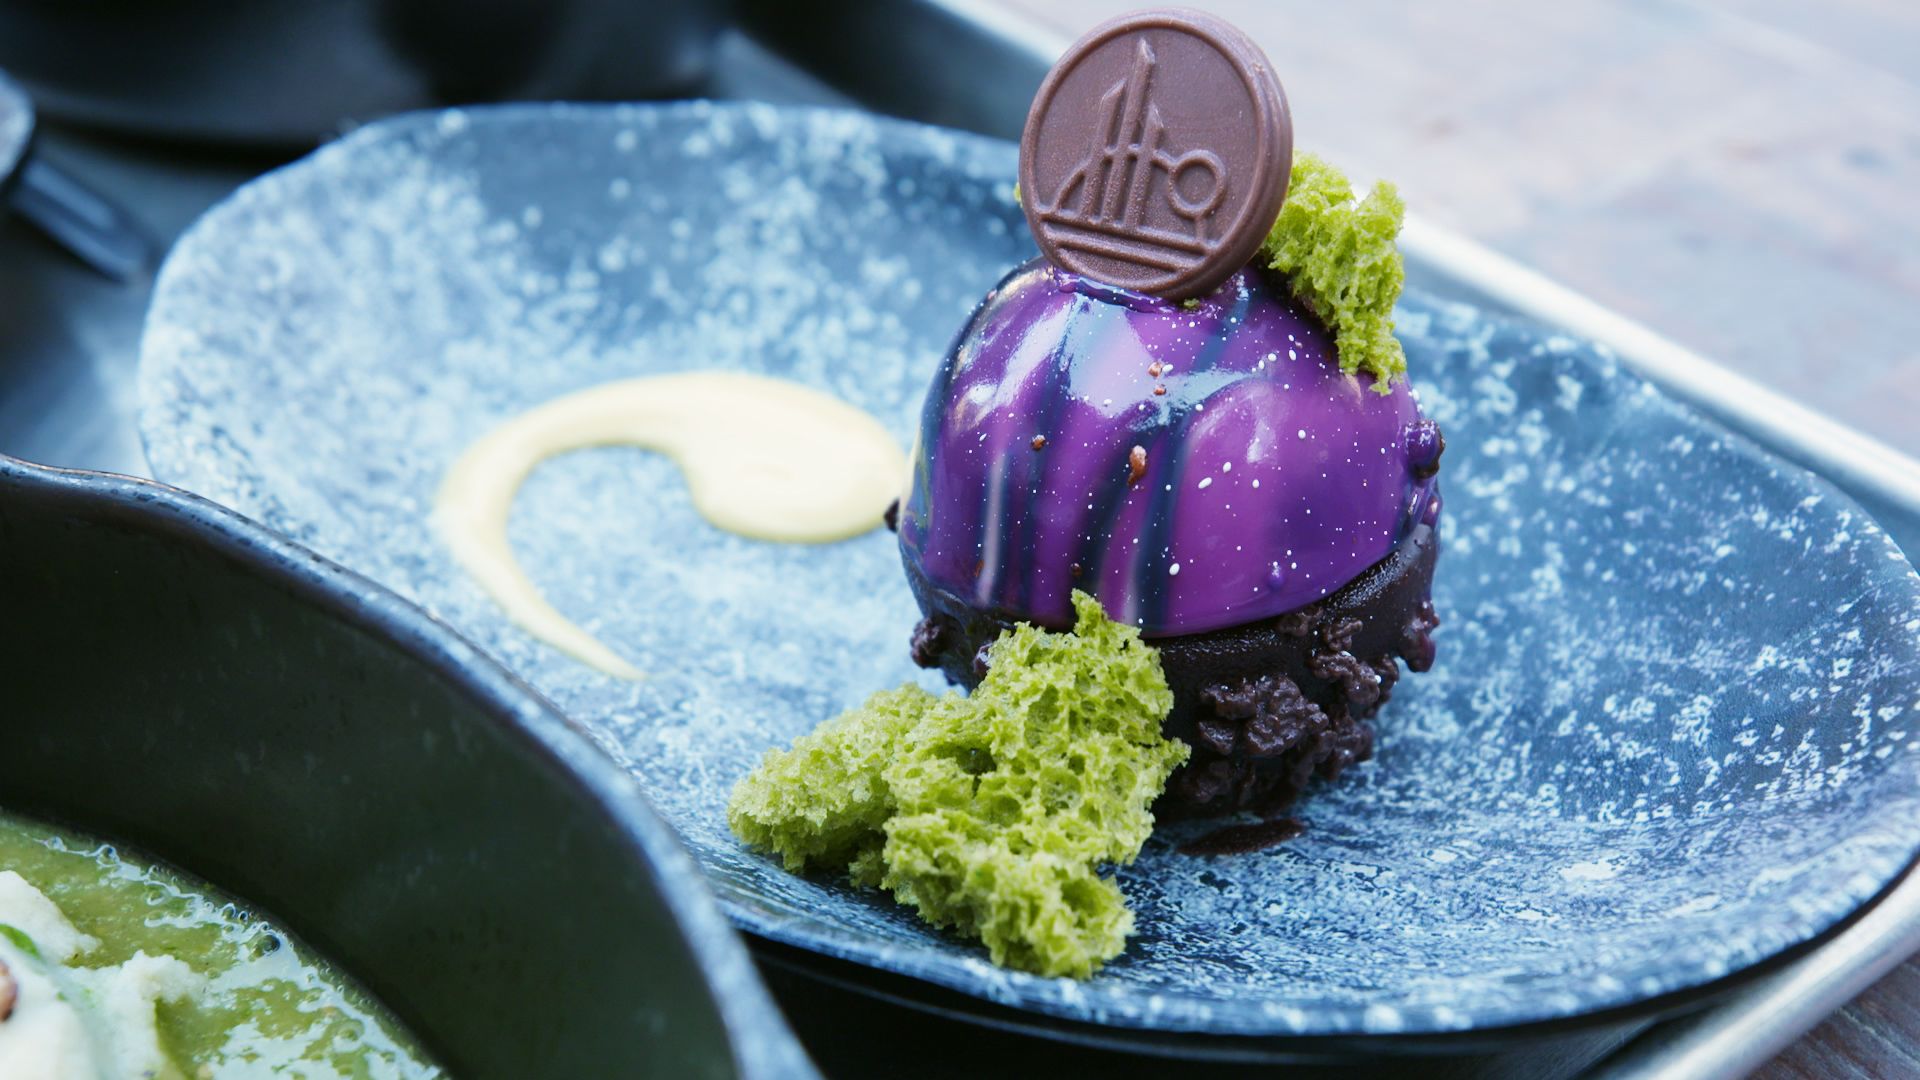 Galactic Guide to Star Wars: Galaxy's Edge Food and Drink